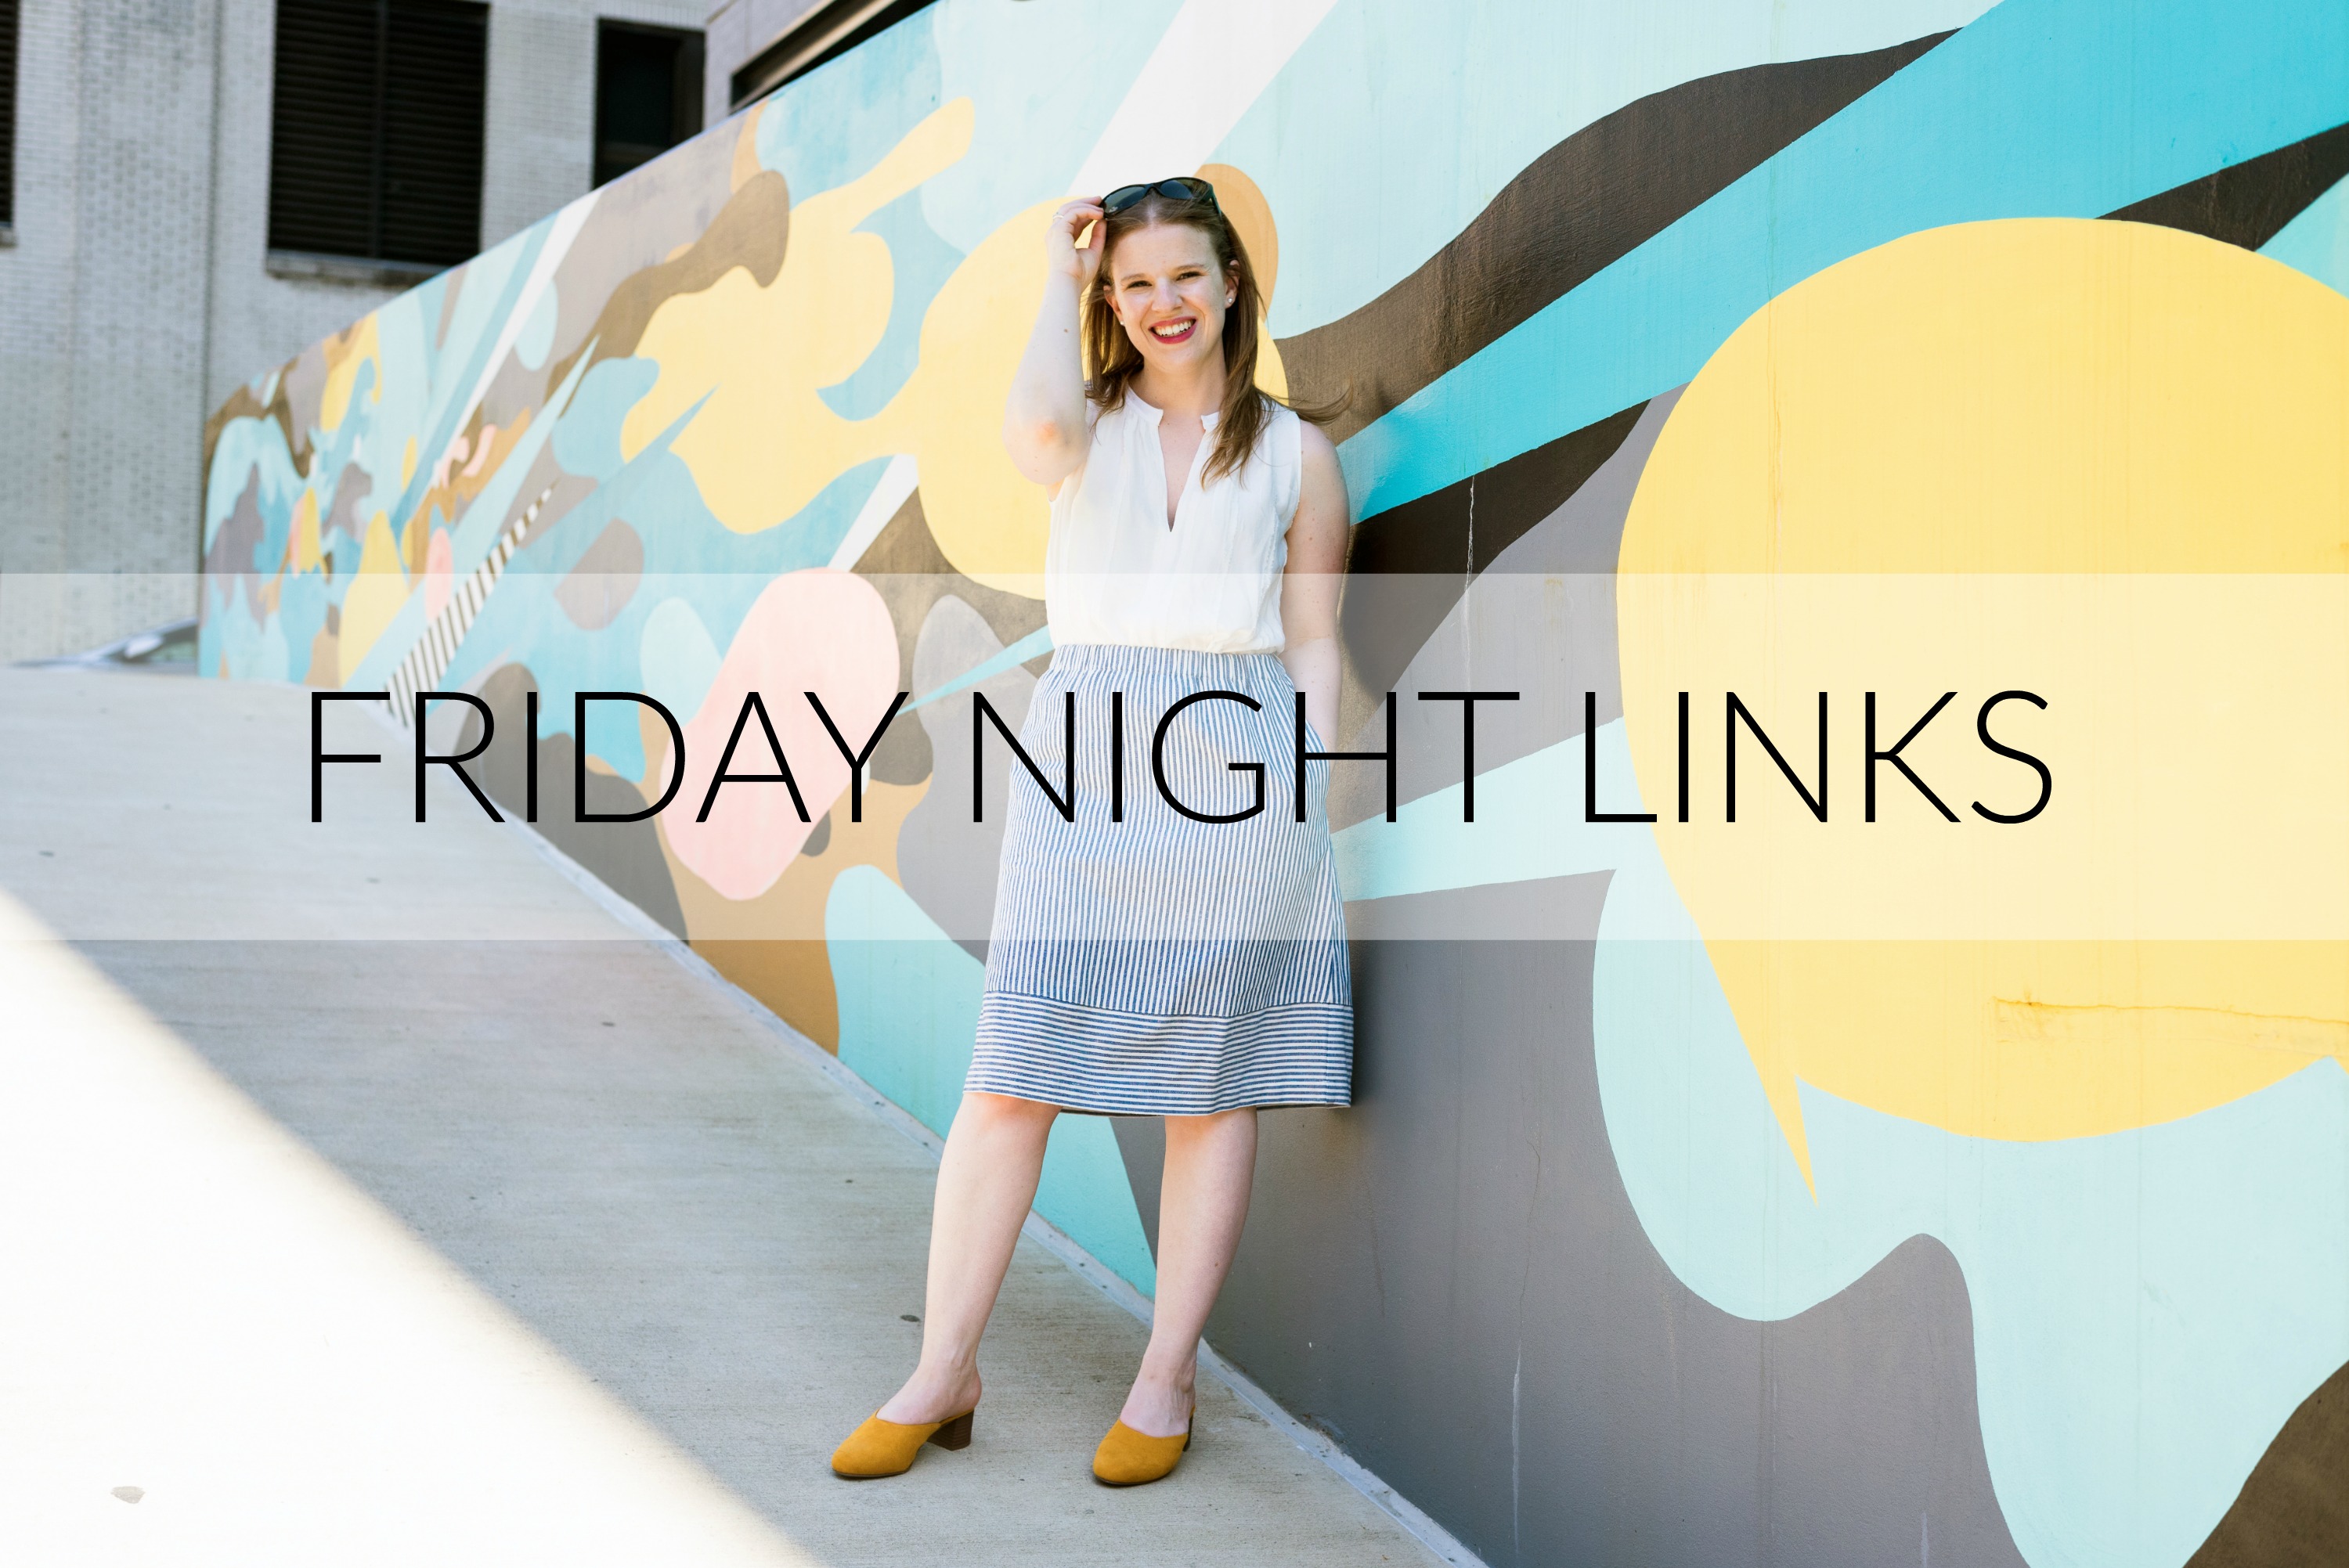 Friday Night Links | Something Good | A DC Style and Lifestyle Blog on a Budget, shuts down his bar to go build schools